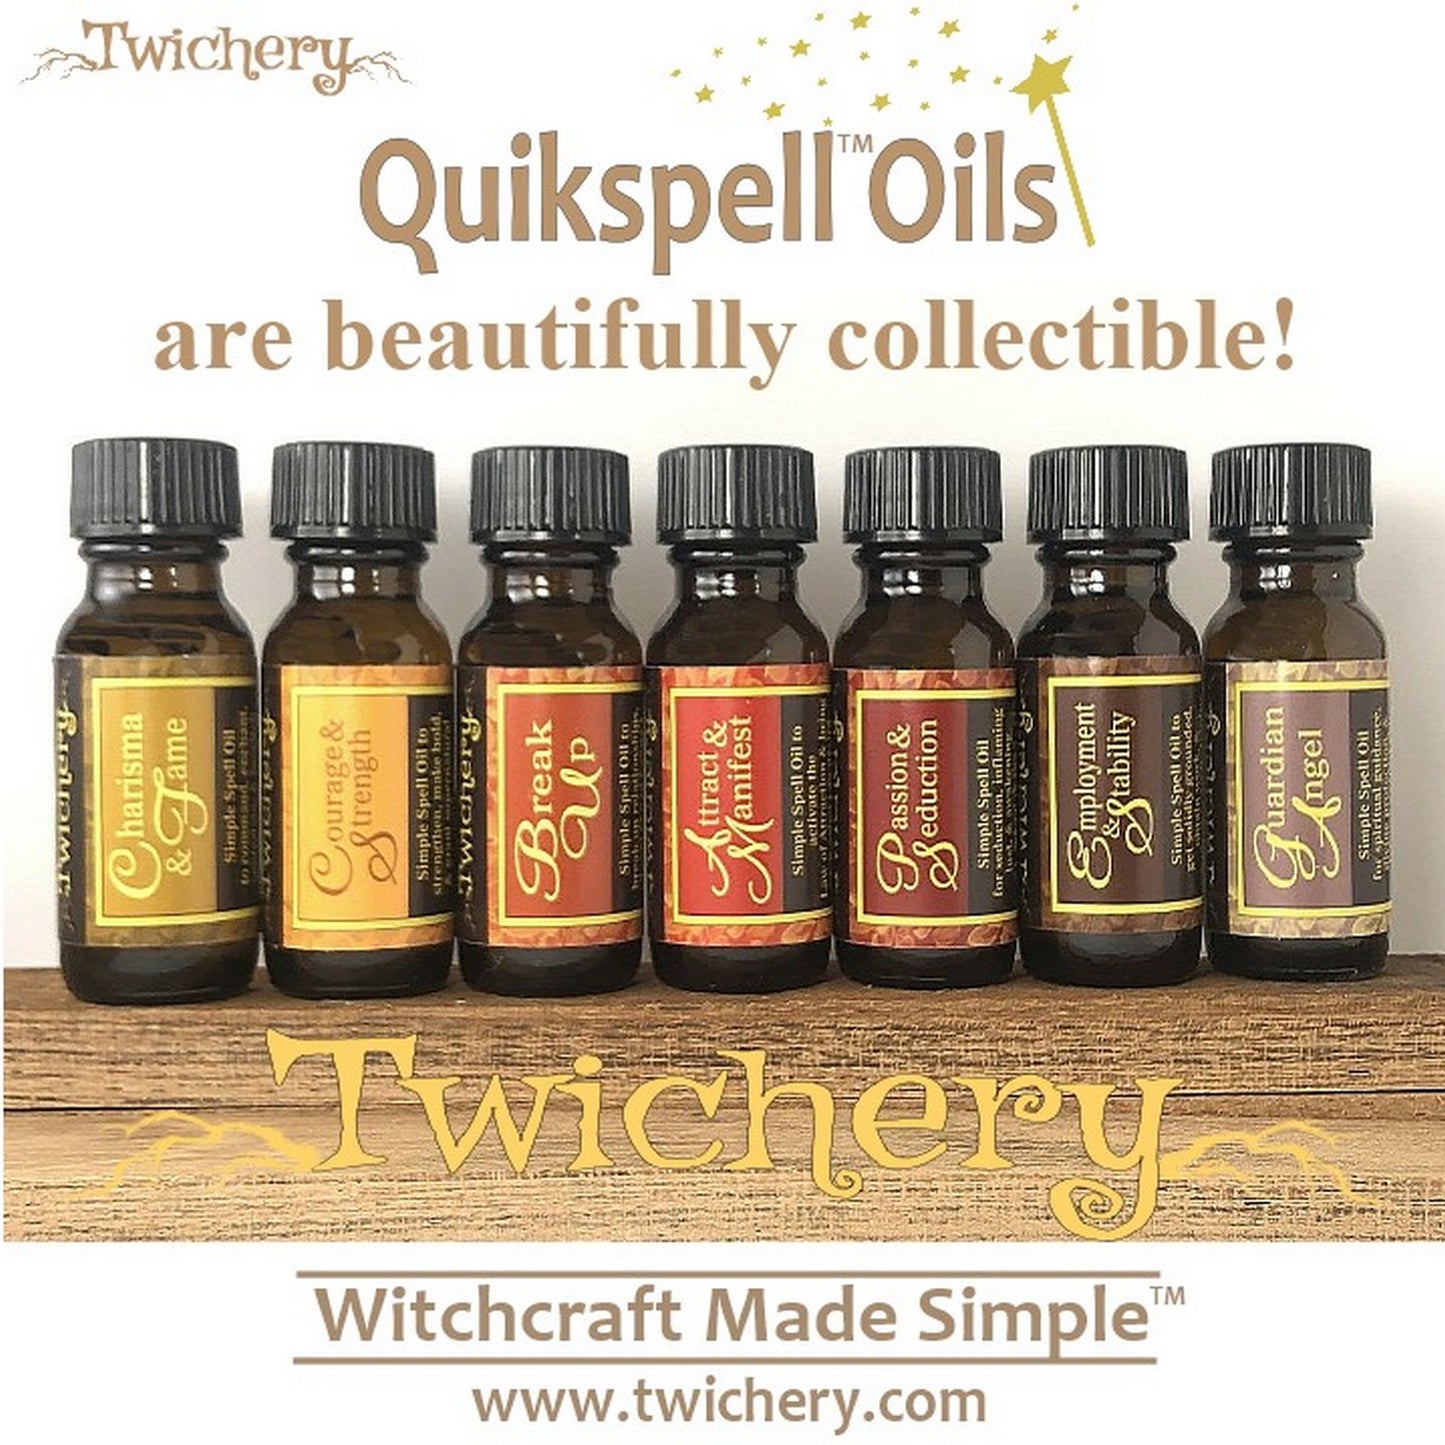 Collect all 24 Twichery Quikspell Oils for all your magickal needs, including Wisdom Beyond Your Years! Hoodoo, Voodoo, Wicca, Witchcraft Made Simple